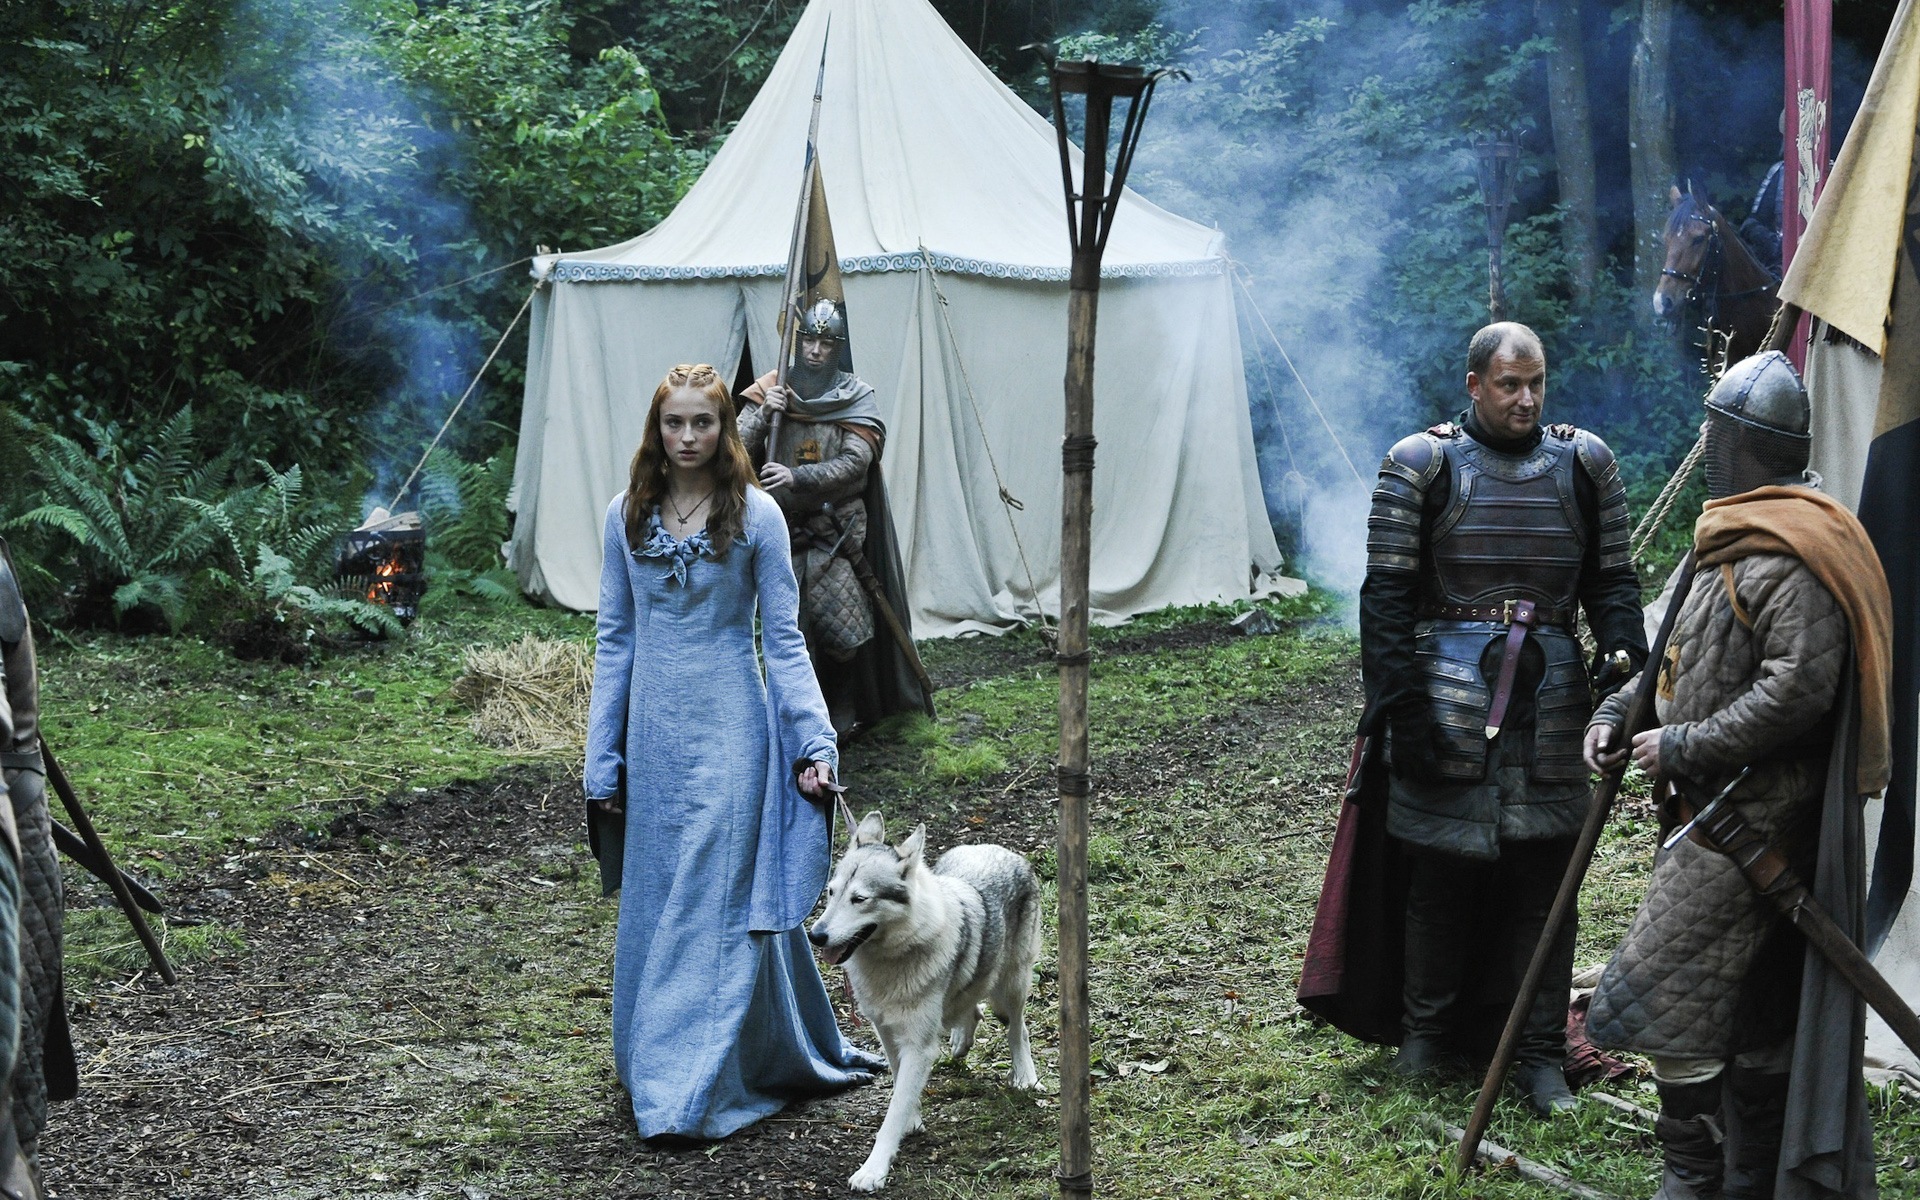 A Song of Ice and Fire: Game of Thrones 冰與火之歌：權力的遊戲高清壁紙 #46 - 1920x1200